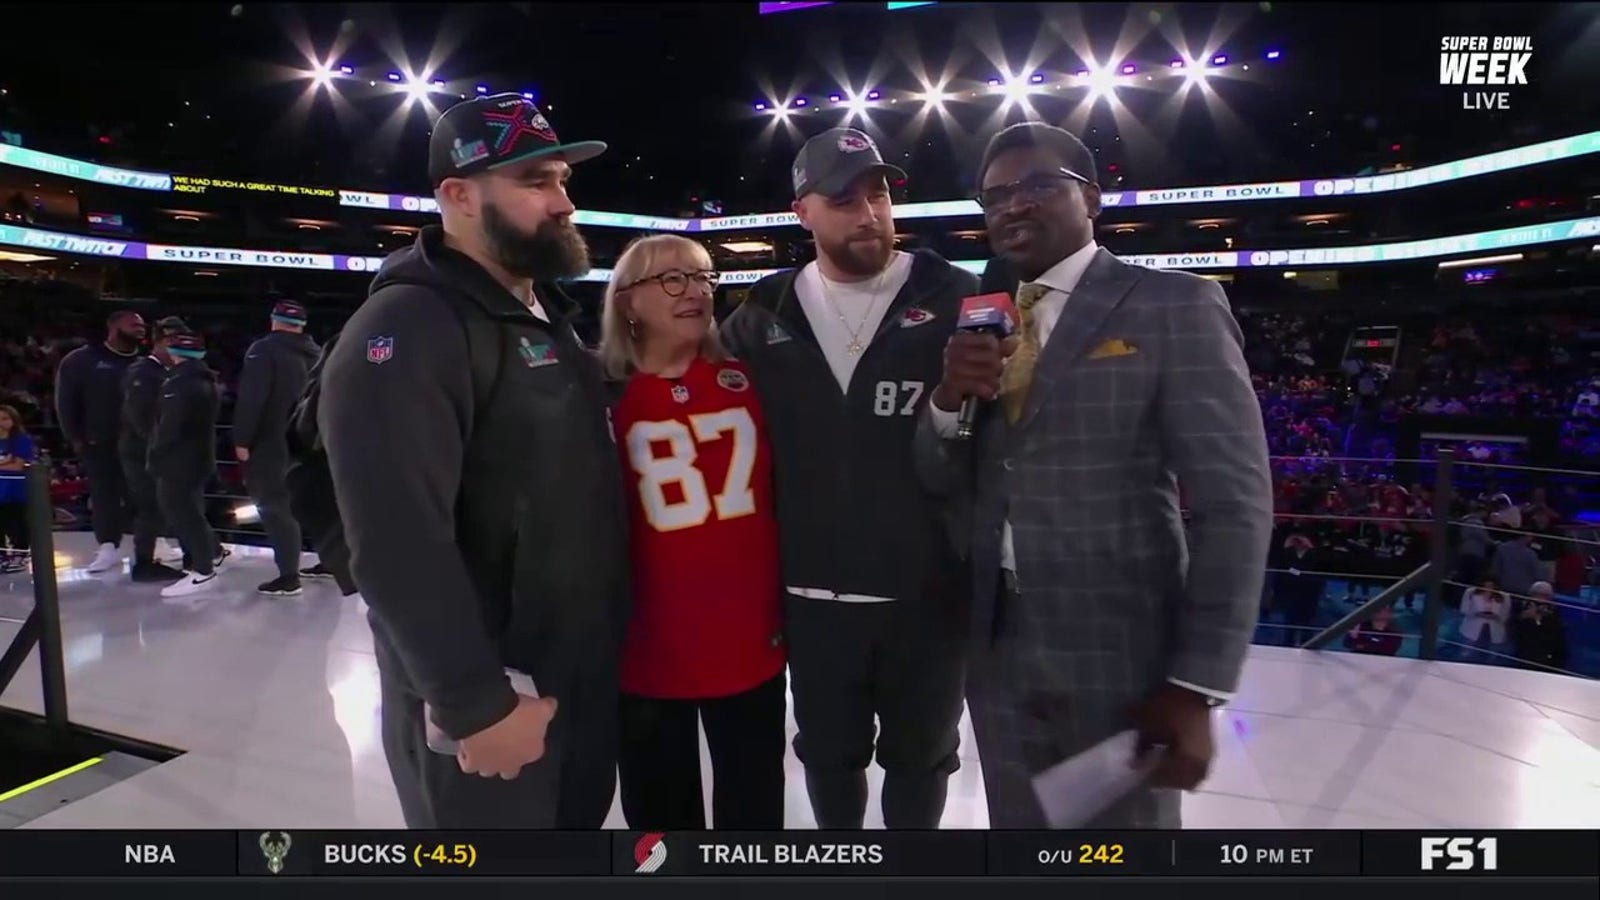 Travis Kelce and Jason Kelce join their mother on stage before Super Bowl LVII